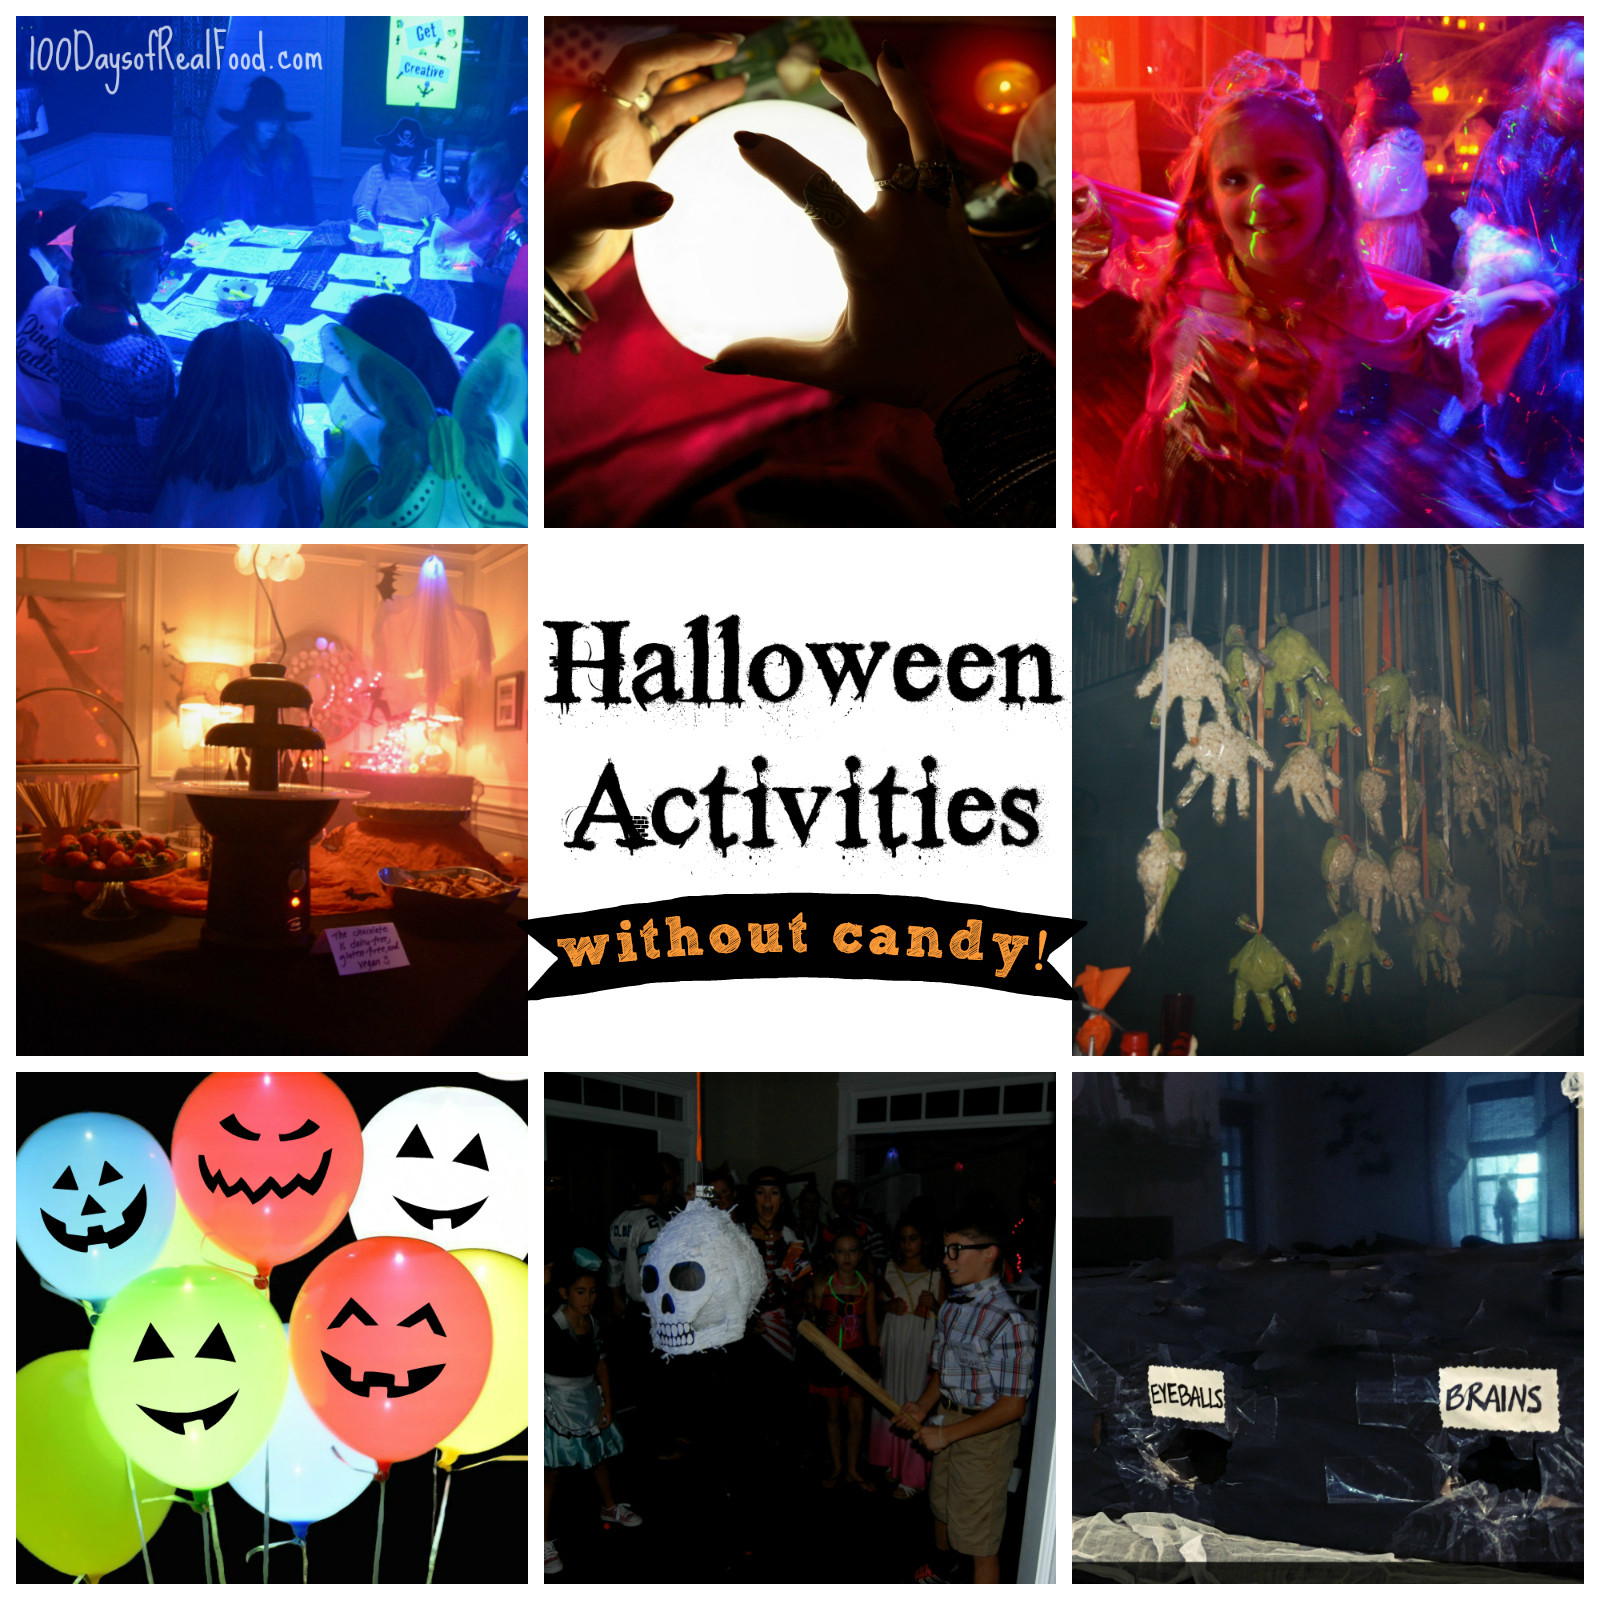 Halloween Party Game Ideas For Tweens
 10 Halloween Party Ideas for Tweens without candy